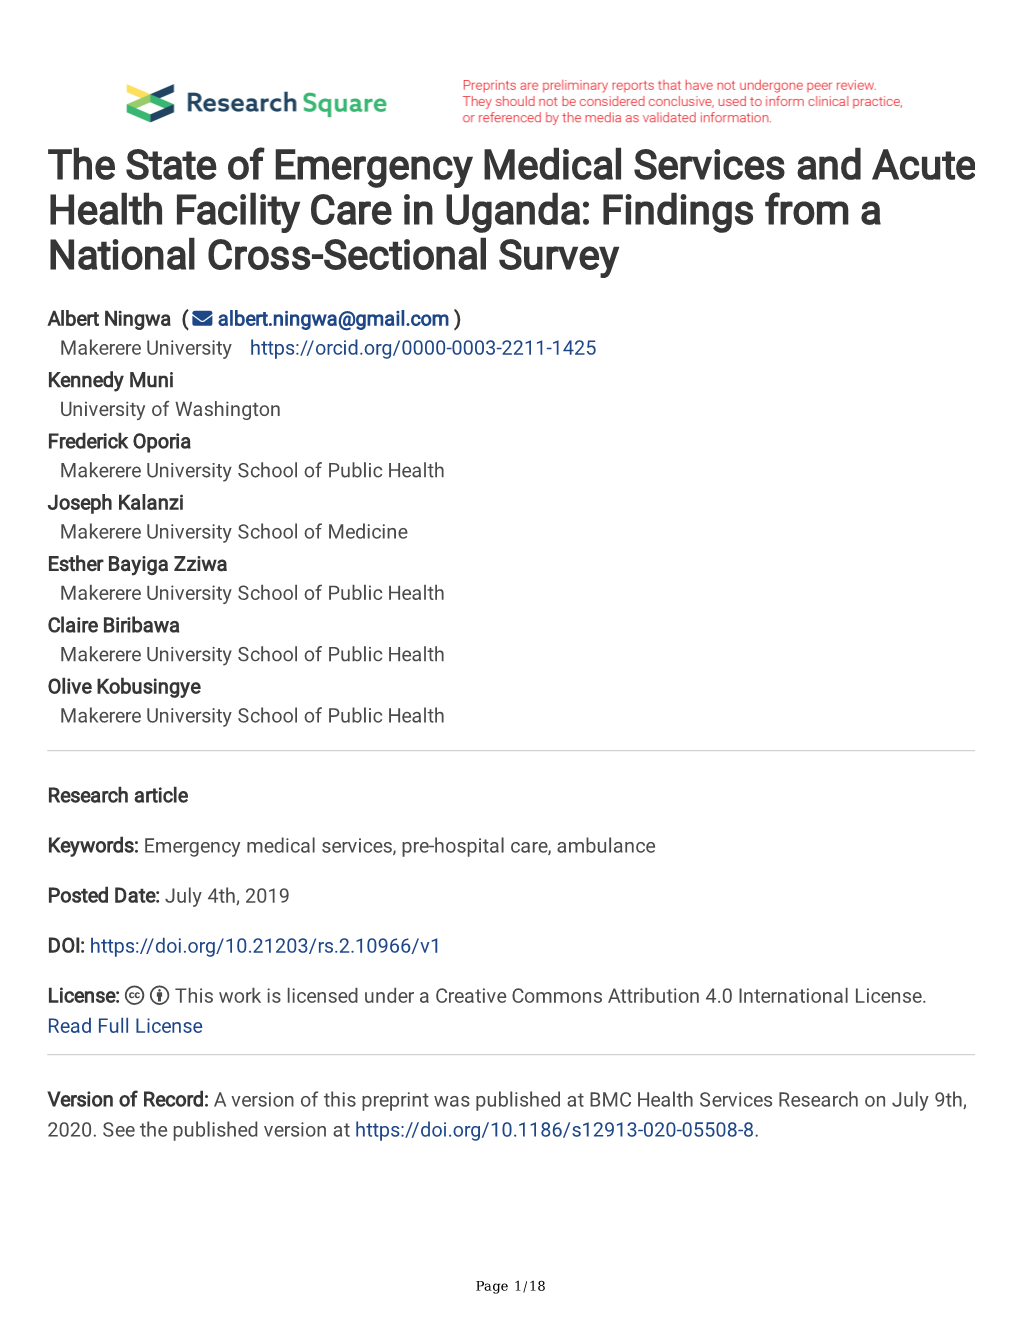 The State of Emergency Medical Services and Acute Health Facility Care in Uganda: Findings from a National Cross-Sectional Survey